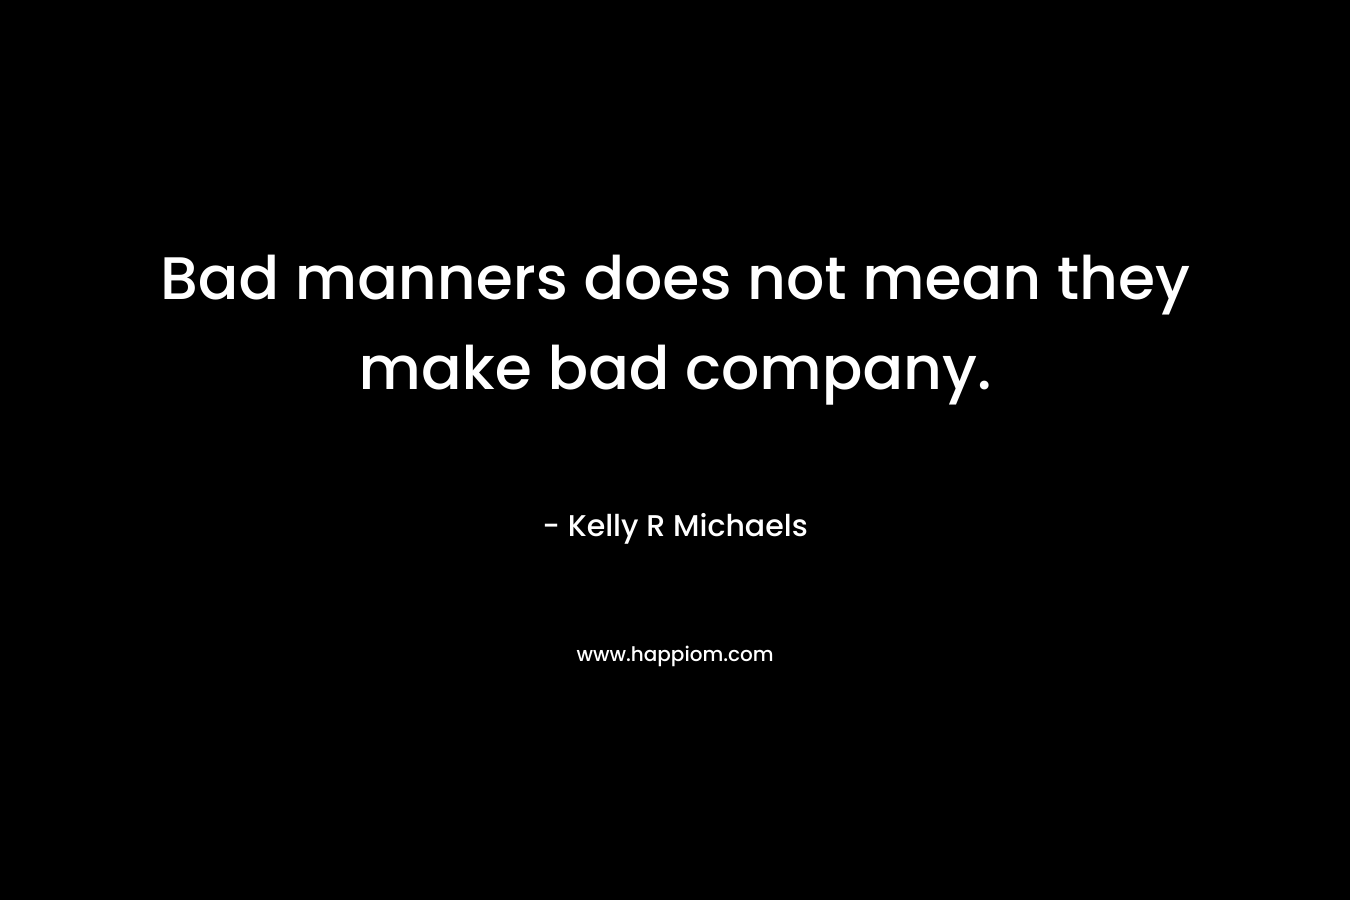 Bad manners does not mean they make bad company. – Kelly R Michaels